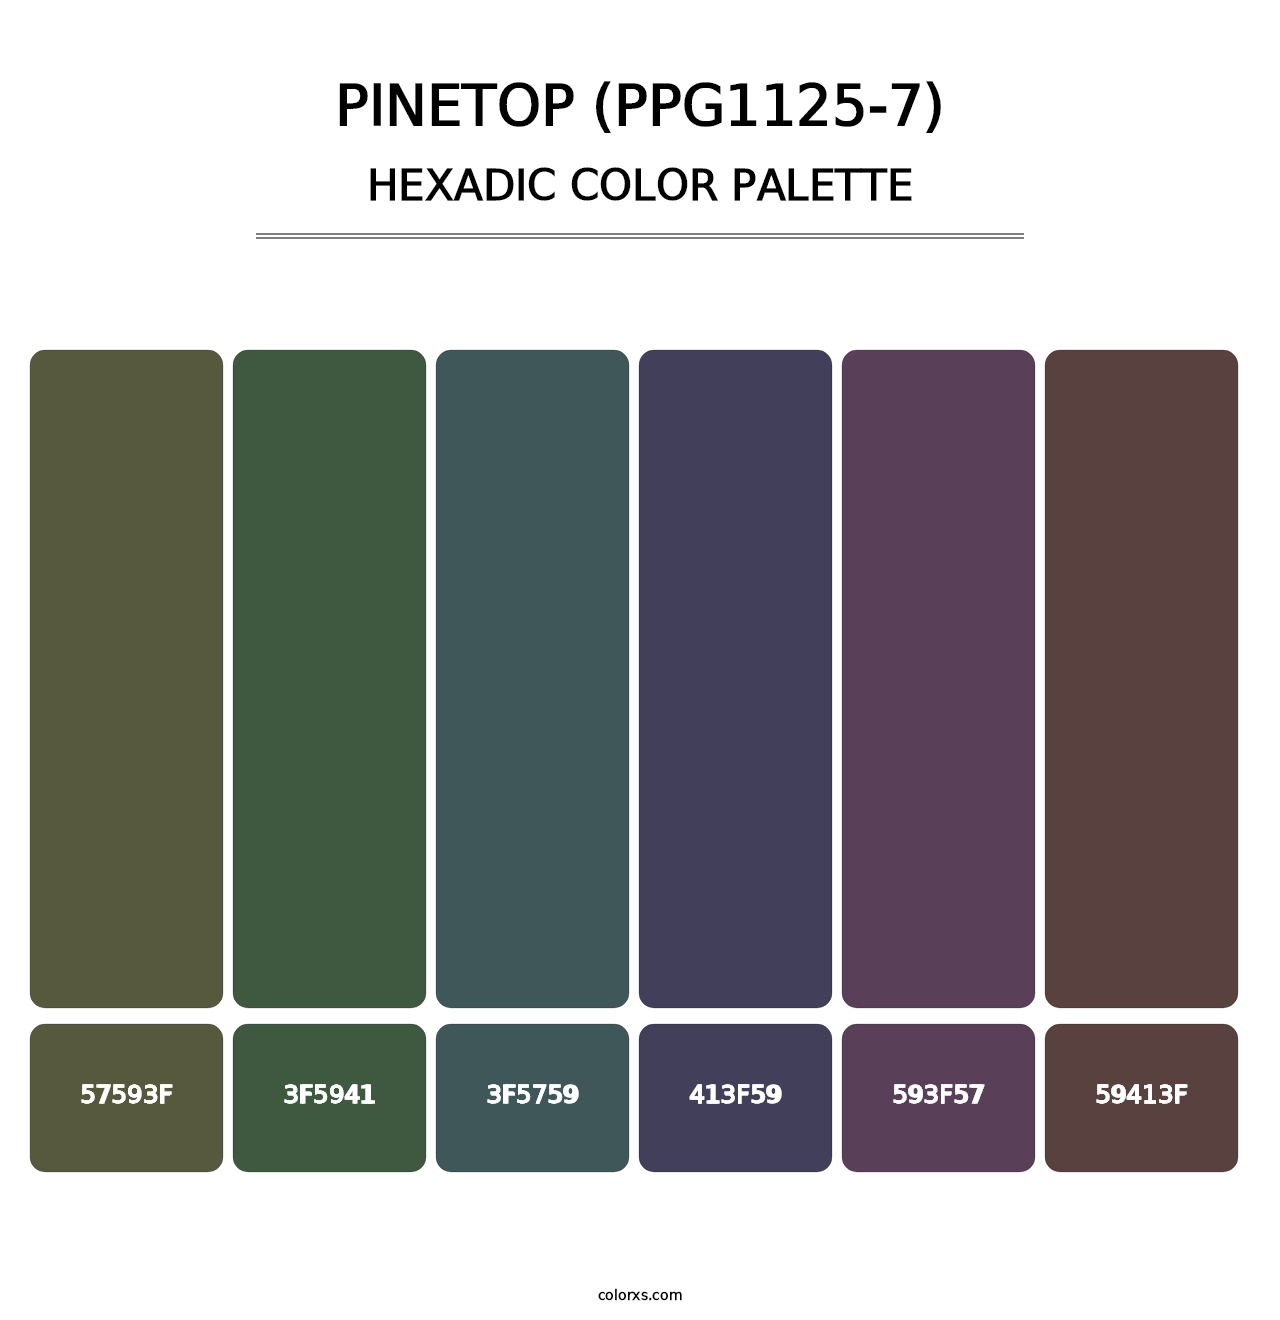 Pinetop (PPG1125-7) - Hexadic Color Palette